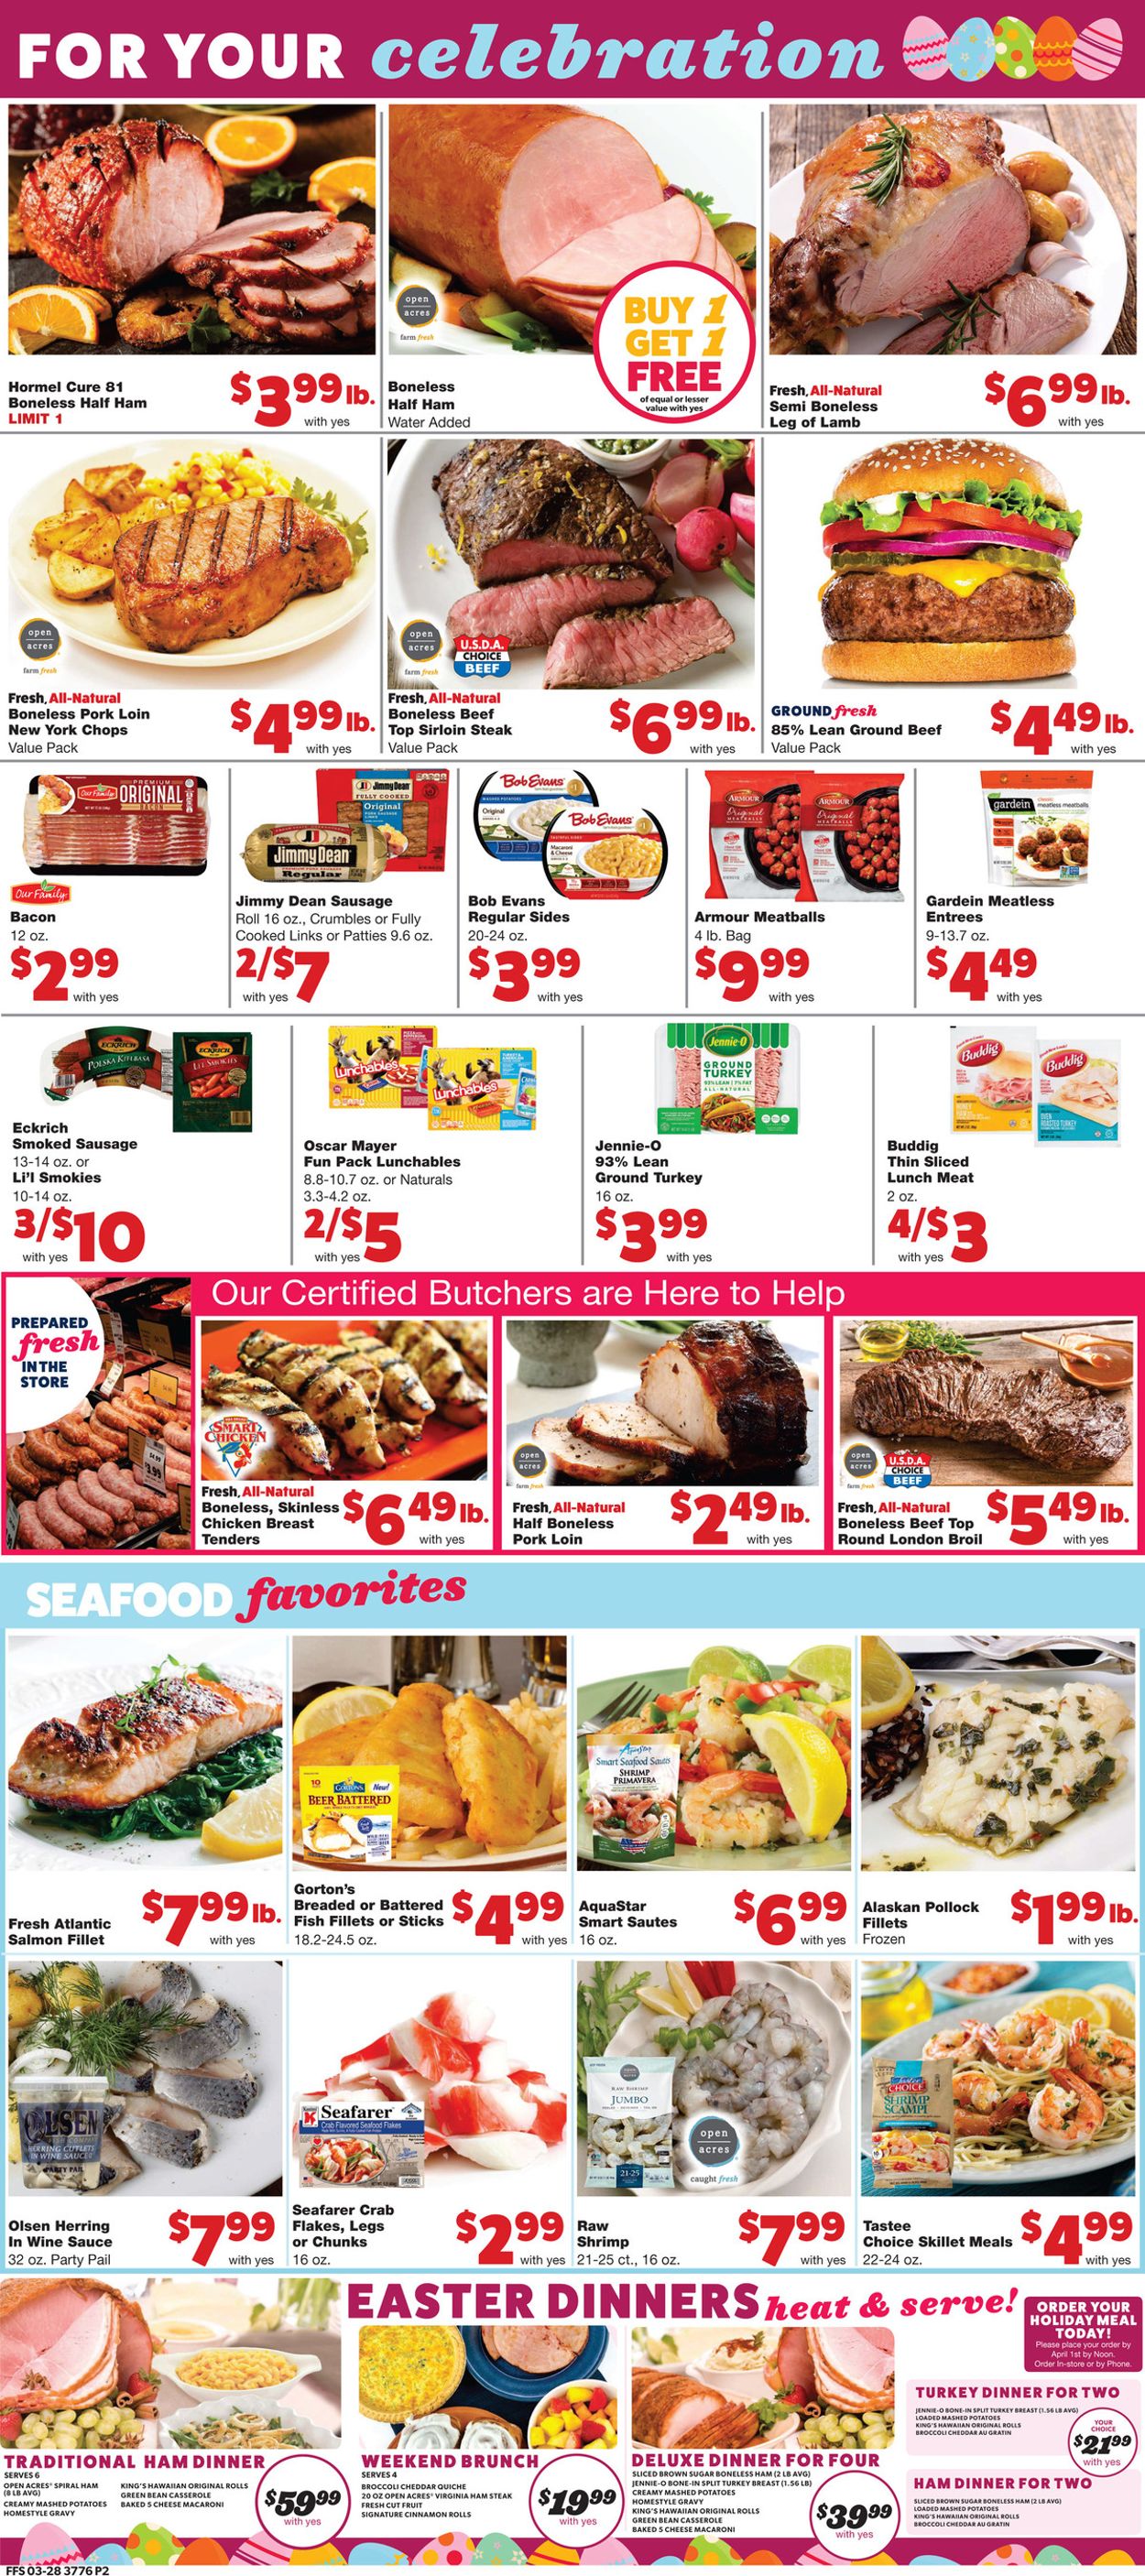 Family Fare - Easter 2021 ad Weekly Ad Circular - valid 03/31-04/06/2021 (Page 3)